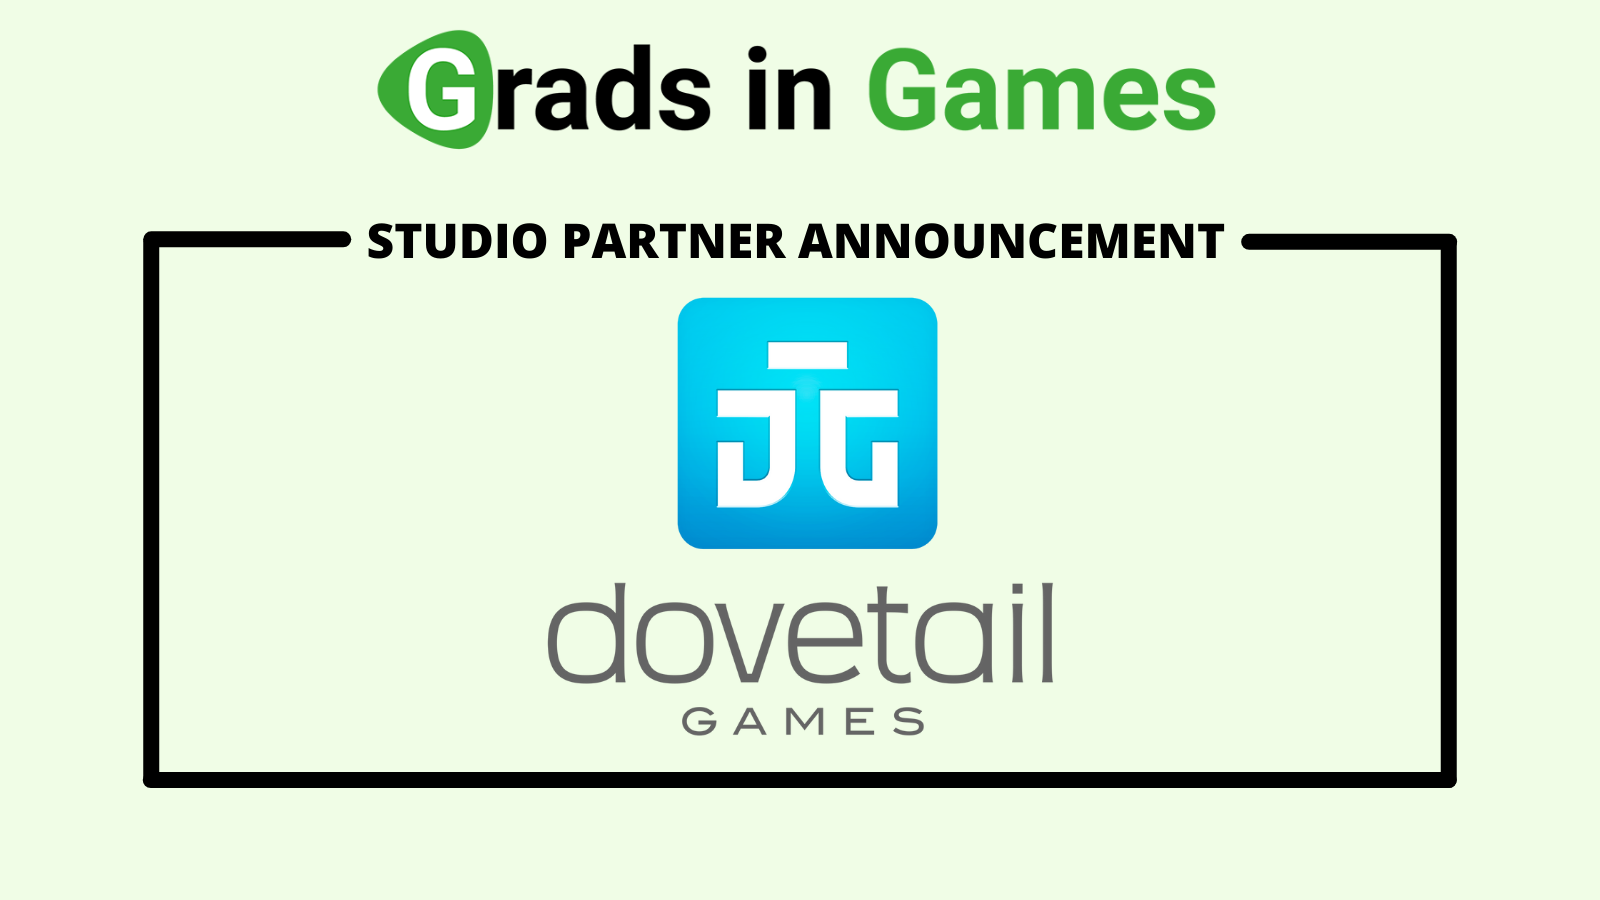 Dovetail joins as a Grads in Games Partner Studio for 2021/22